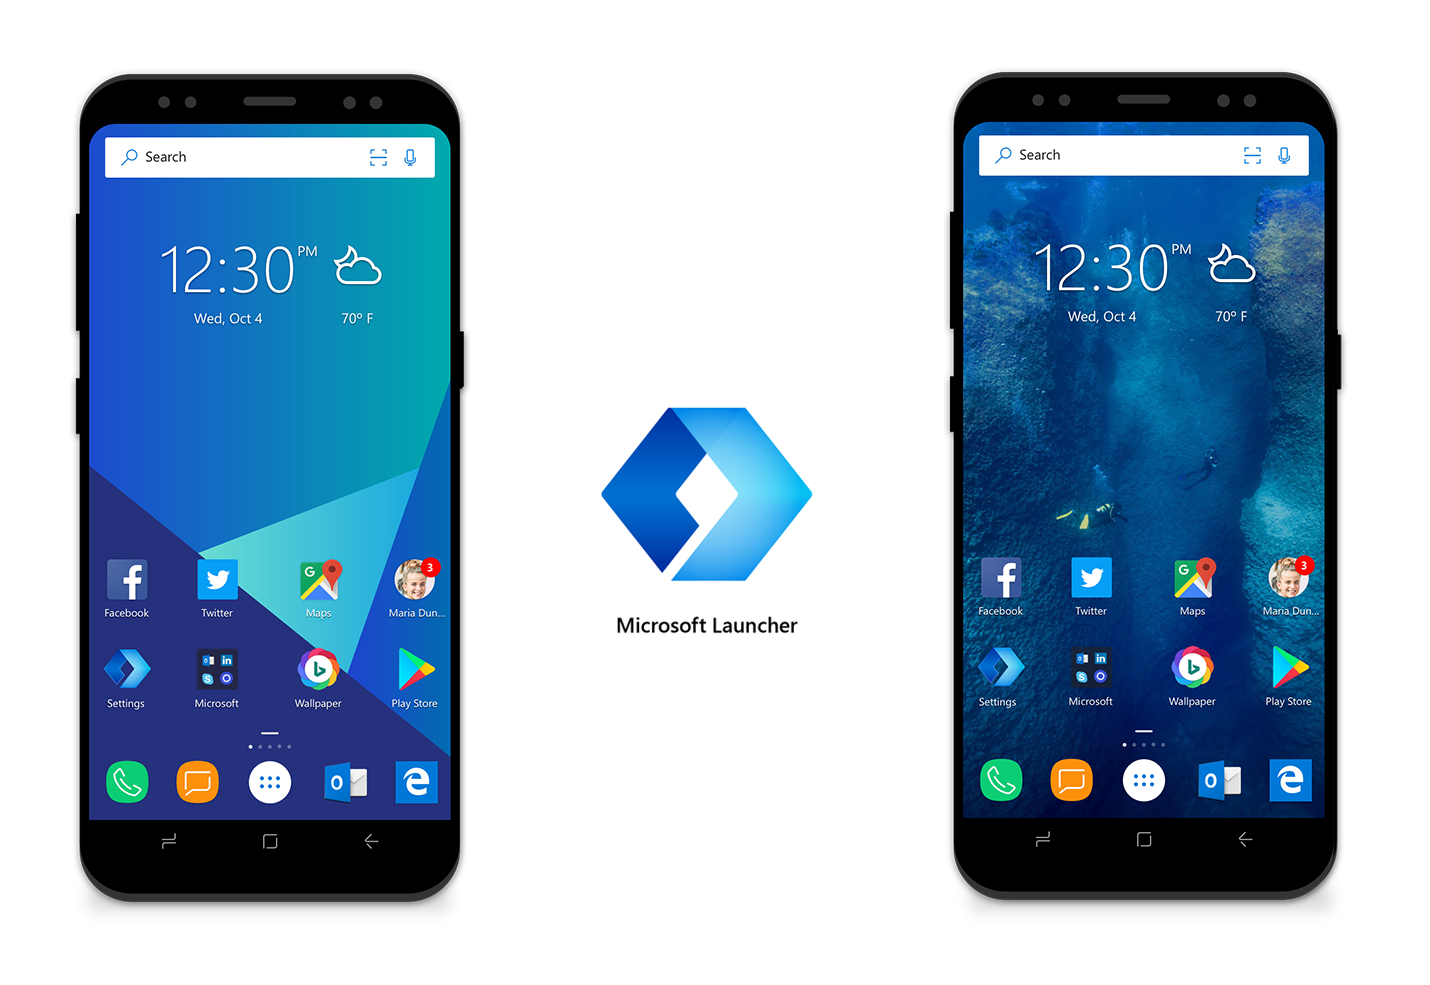 New Microsoft Launcher Beta 5.2 version for Android - January 21 f8d914f0746fe7594075d0b98171885f.png